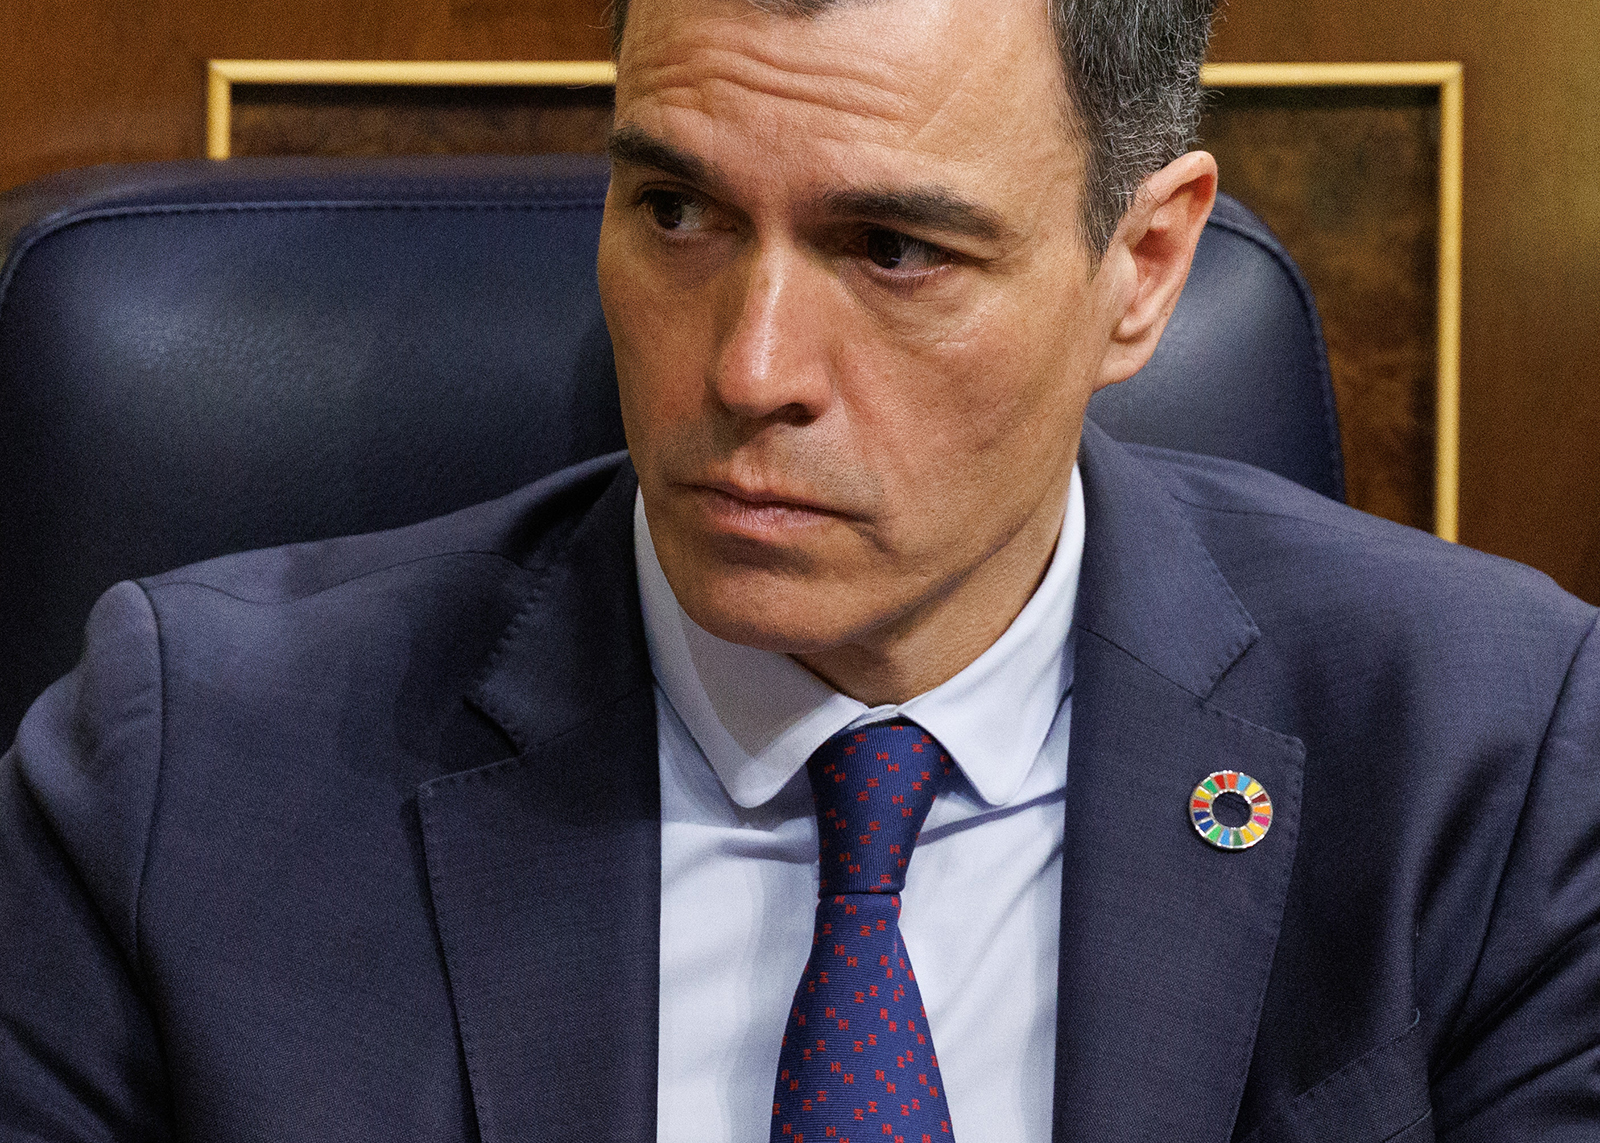 Pedro Sanchez attends the second session of the motion of censure, at the Congress of Deputies, in Madrid, Spain, on March 22.